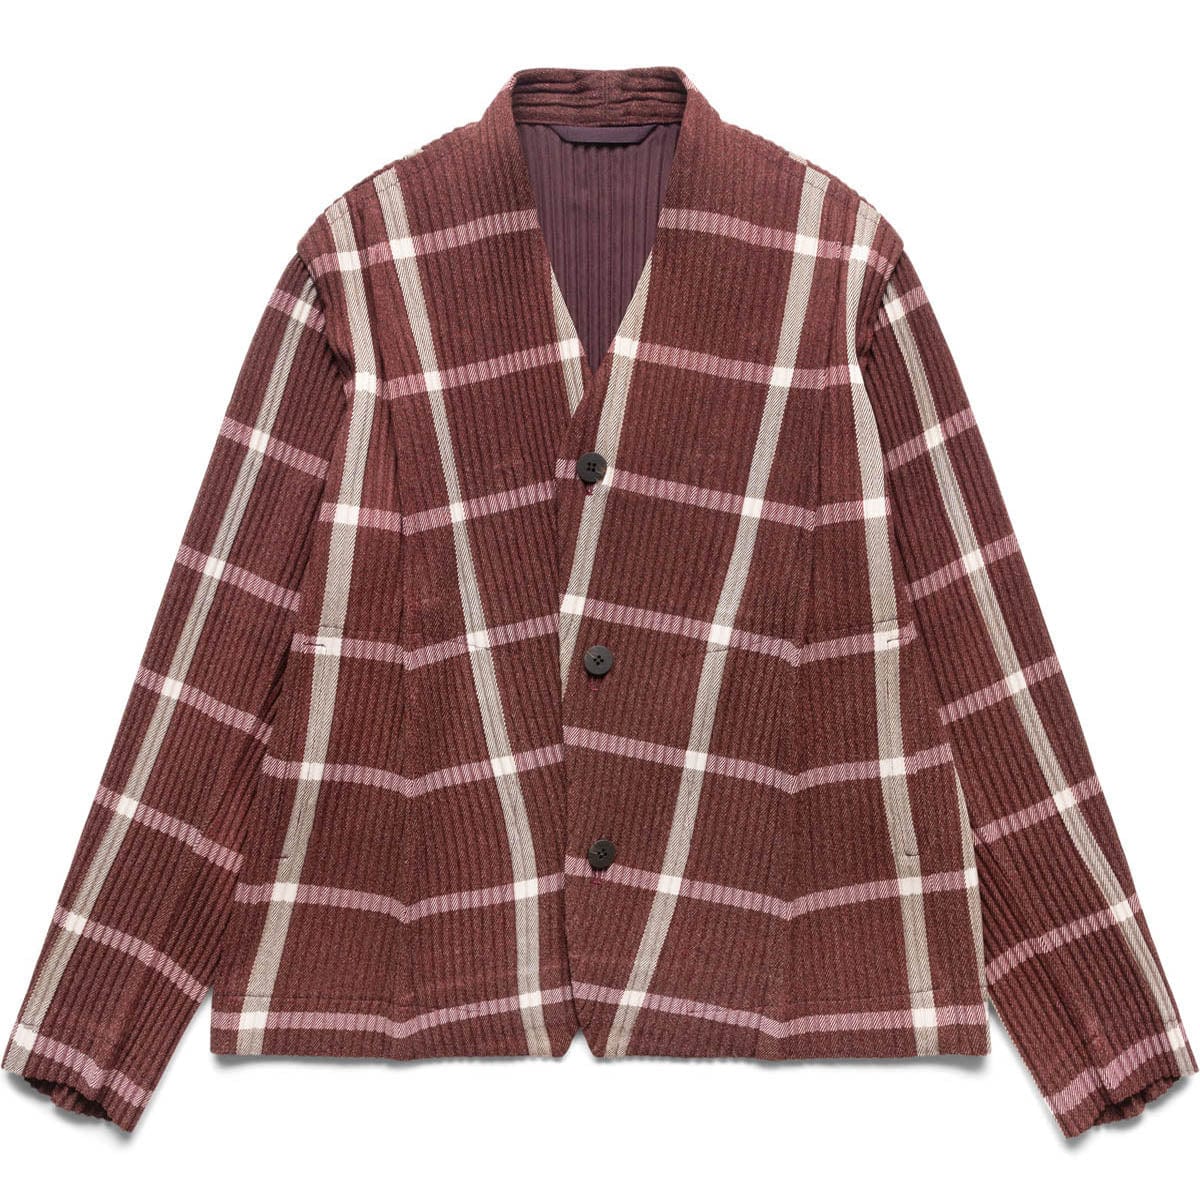 Homme Plissé Issey Miyake Outerwear RED CHECK / 2 TWEED PLEATS